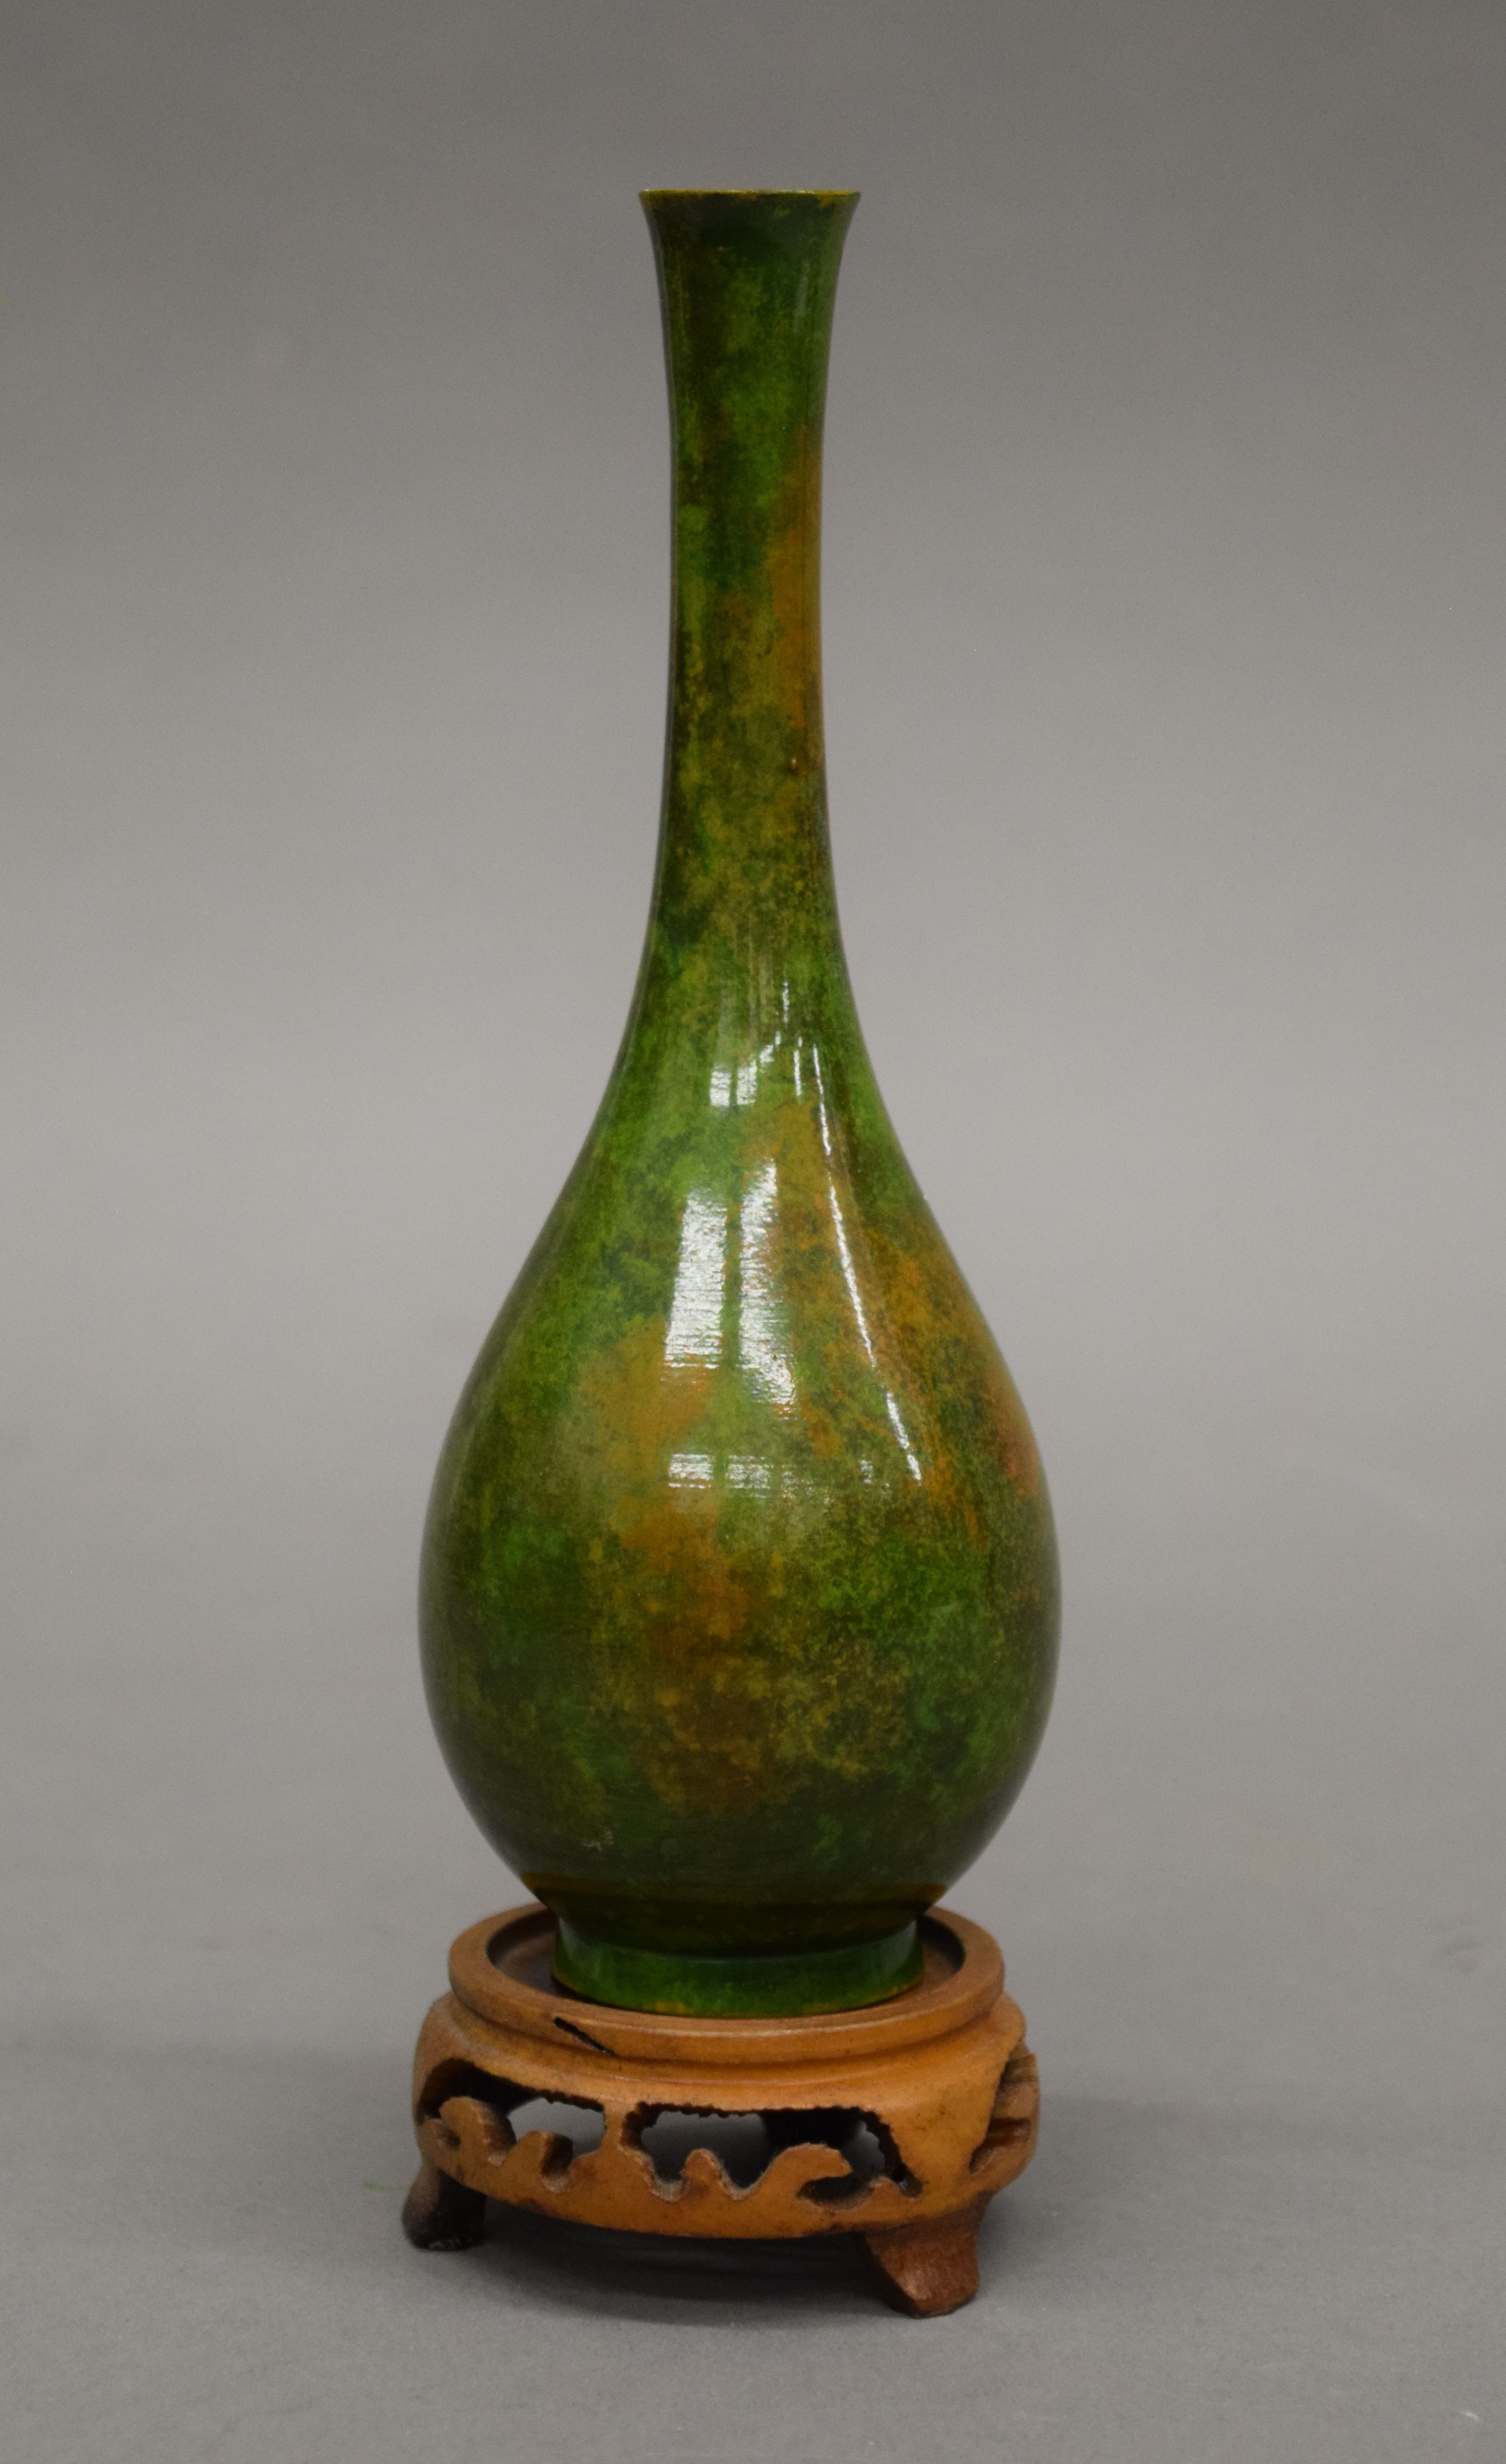 A small Japanese patinated bottle vase on a carved stand. 19 cm high overall. - Image 2 of 4